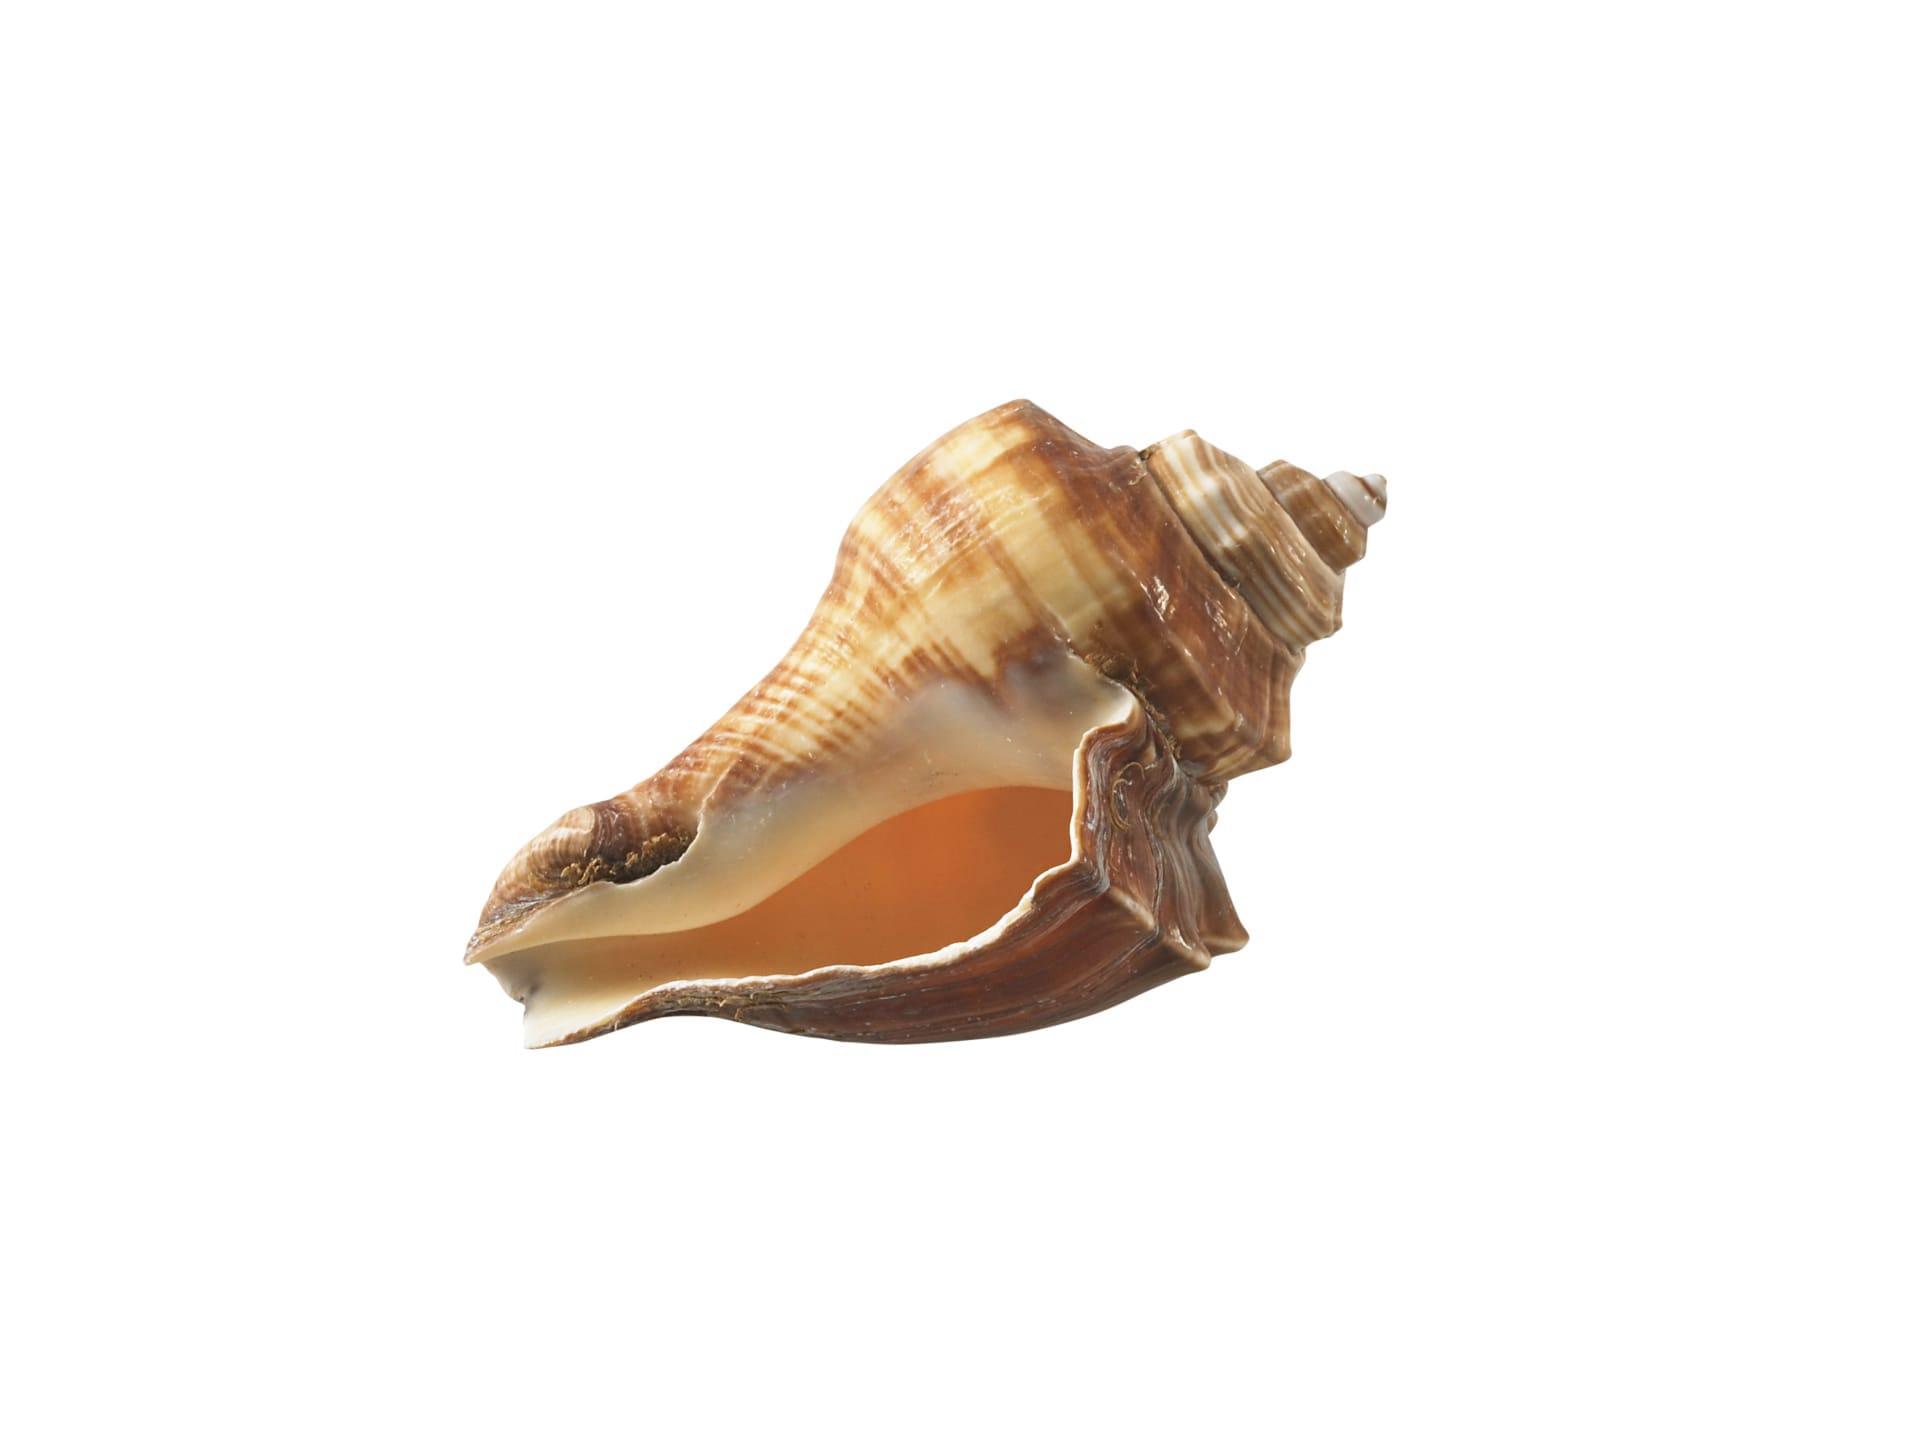 Conch pictures